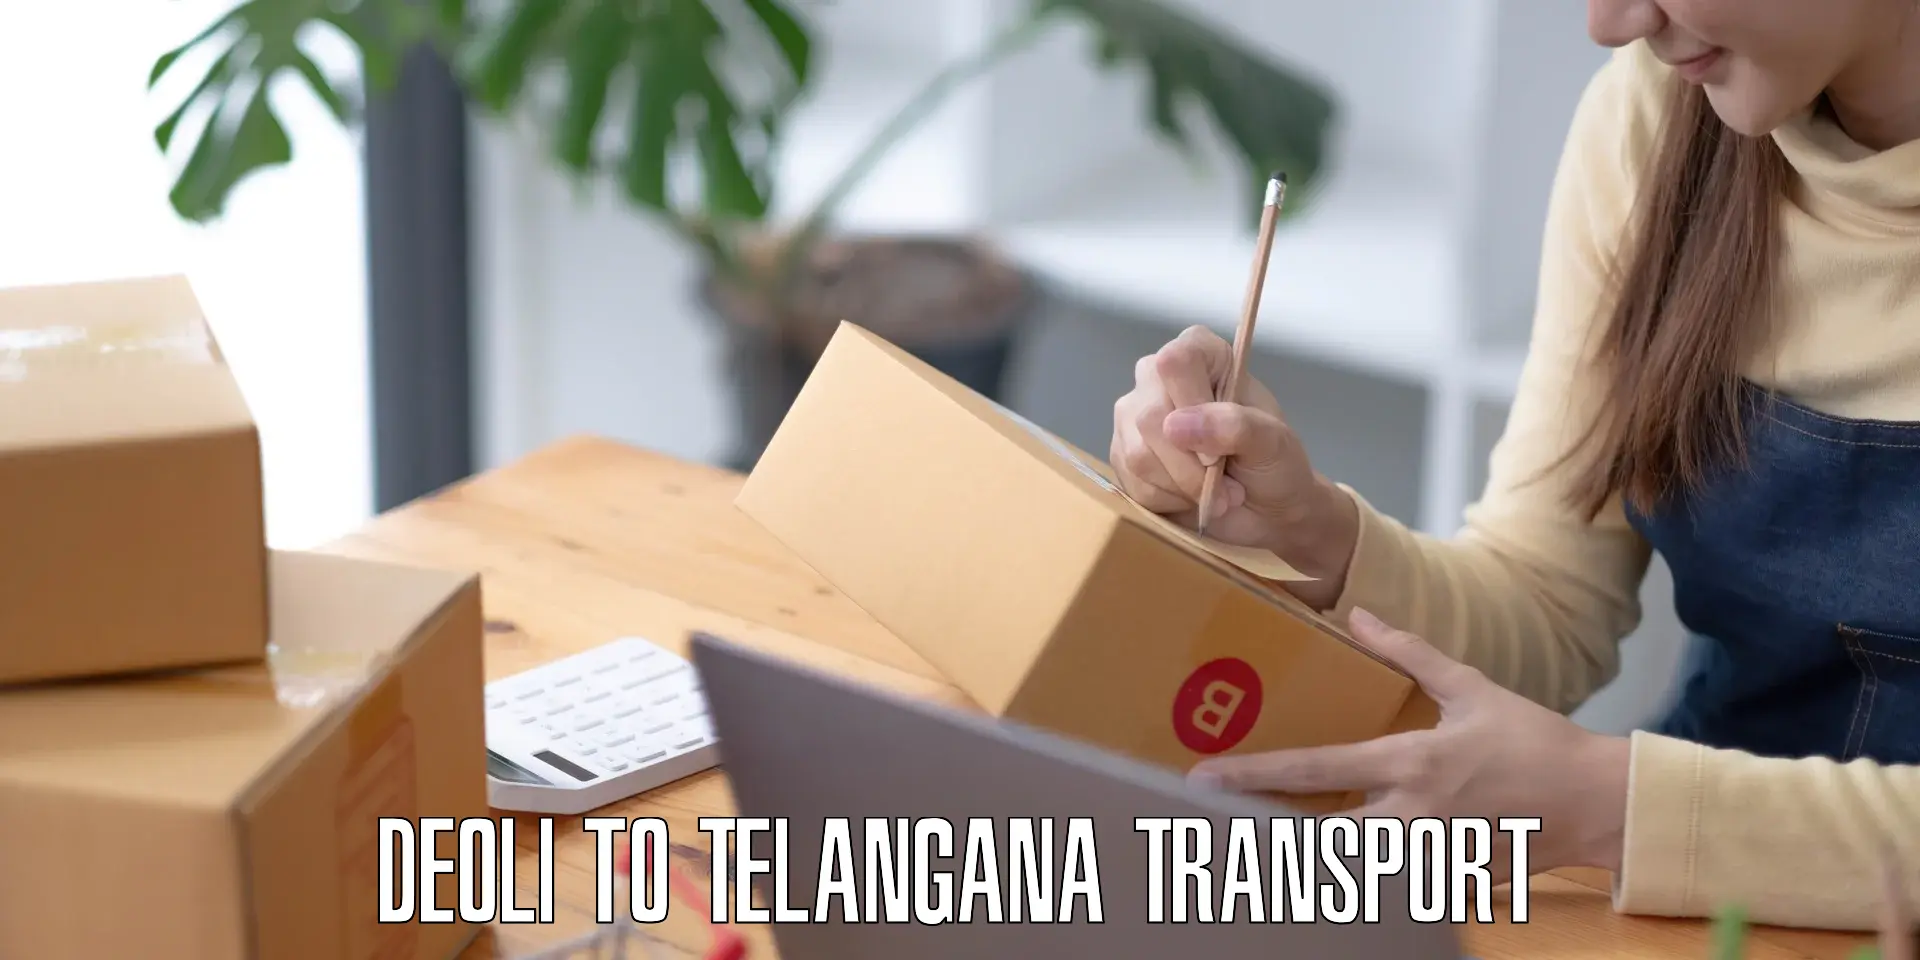 Commercial transport service Deoli to Telangana